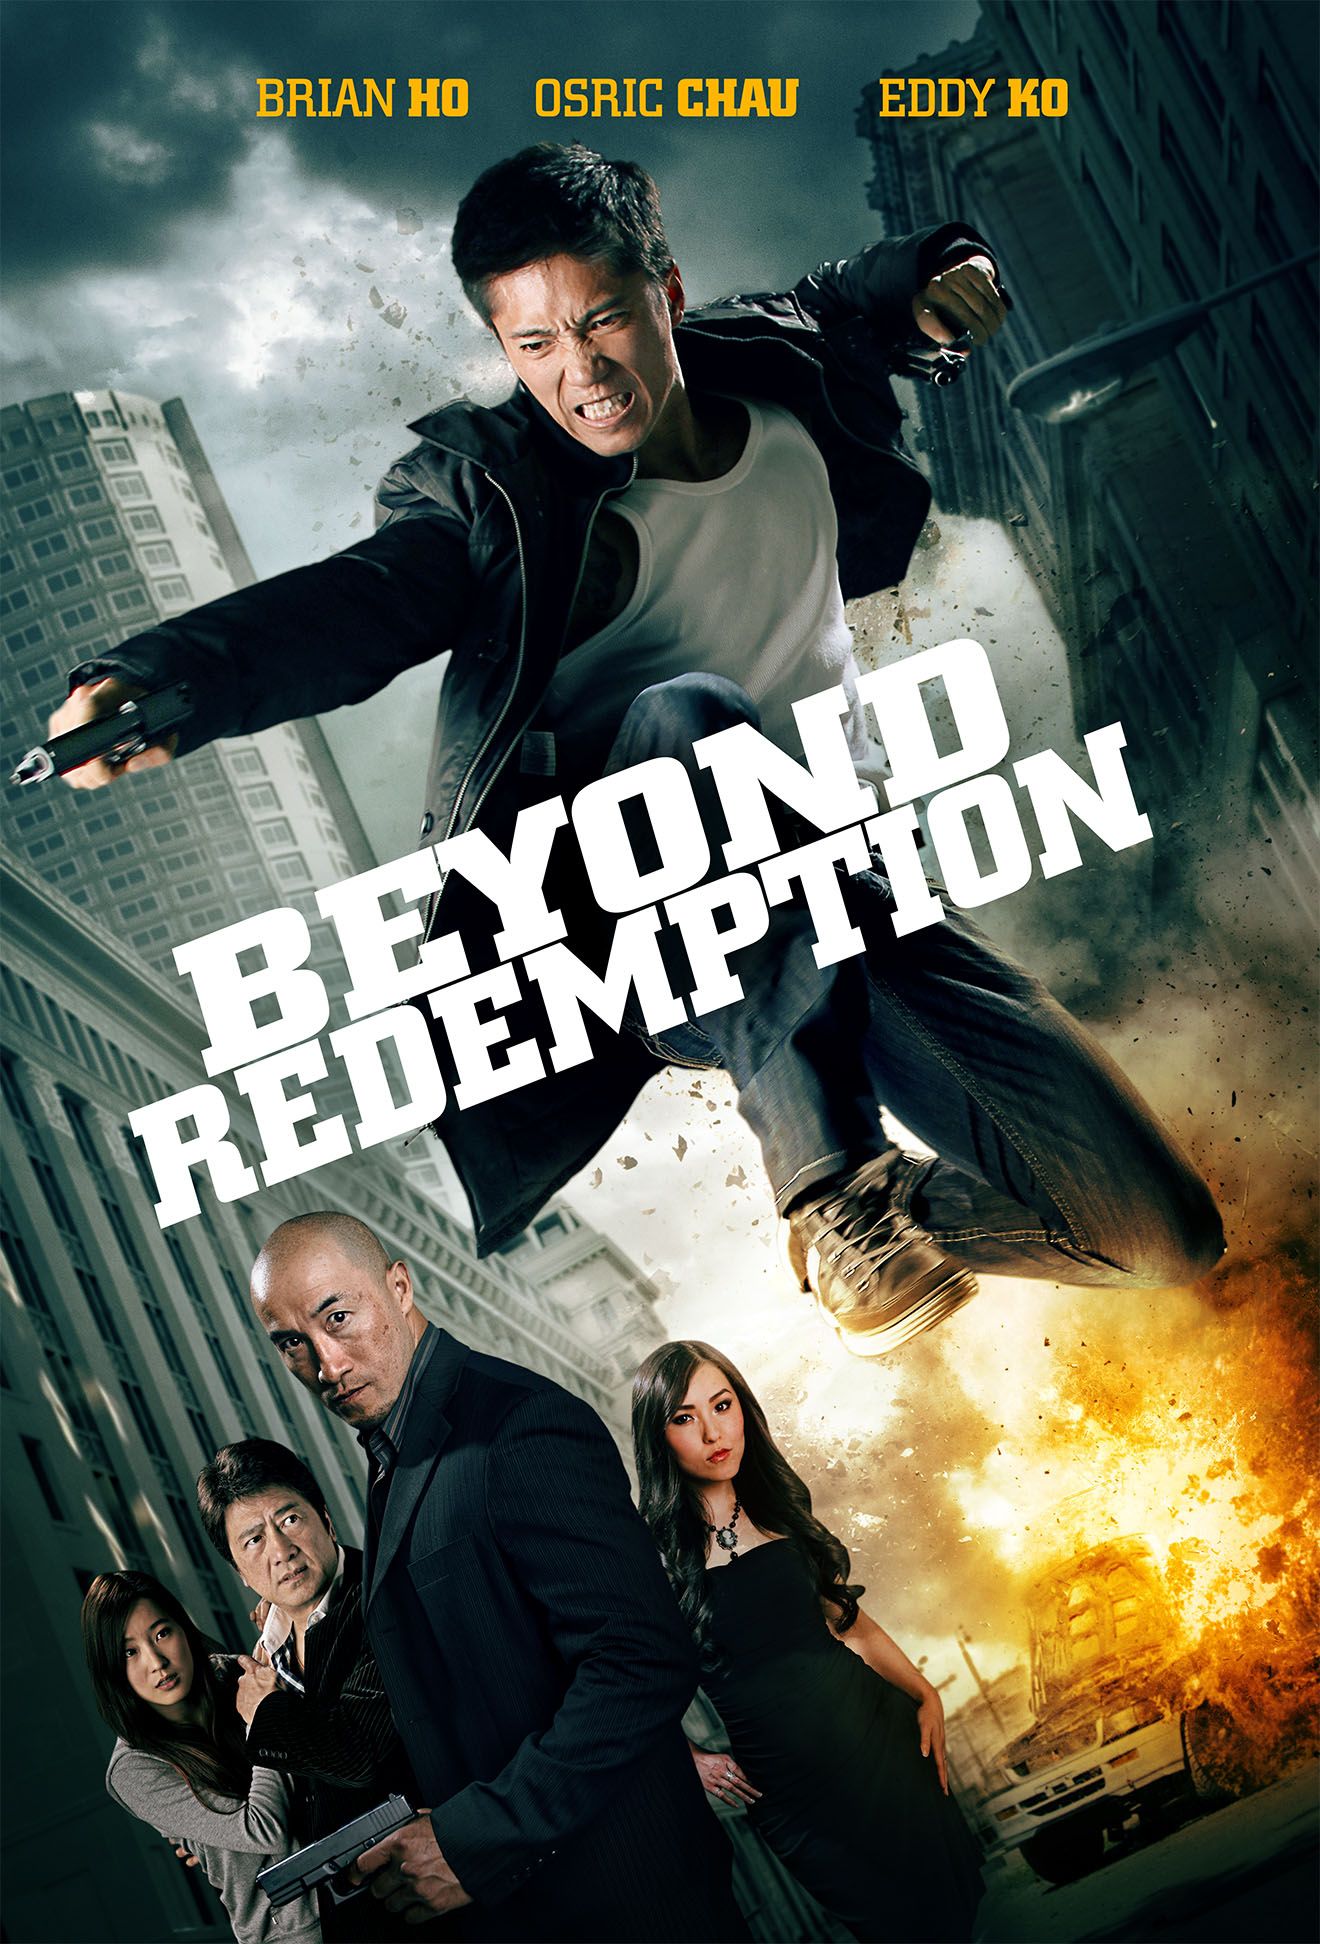 Beyond Redemption (2015) Hindi Dubbed Full Movie